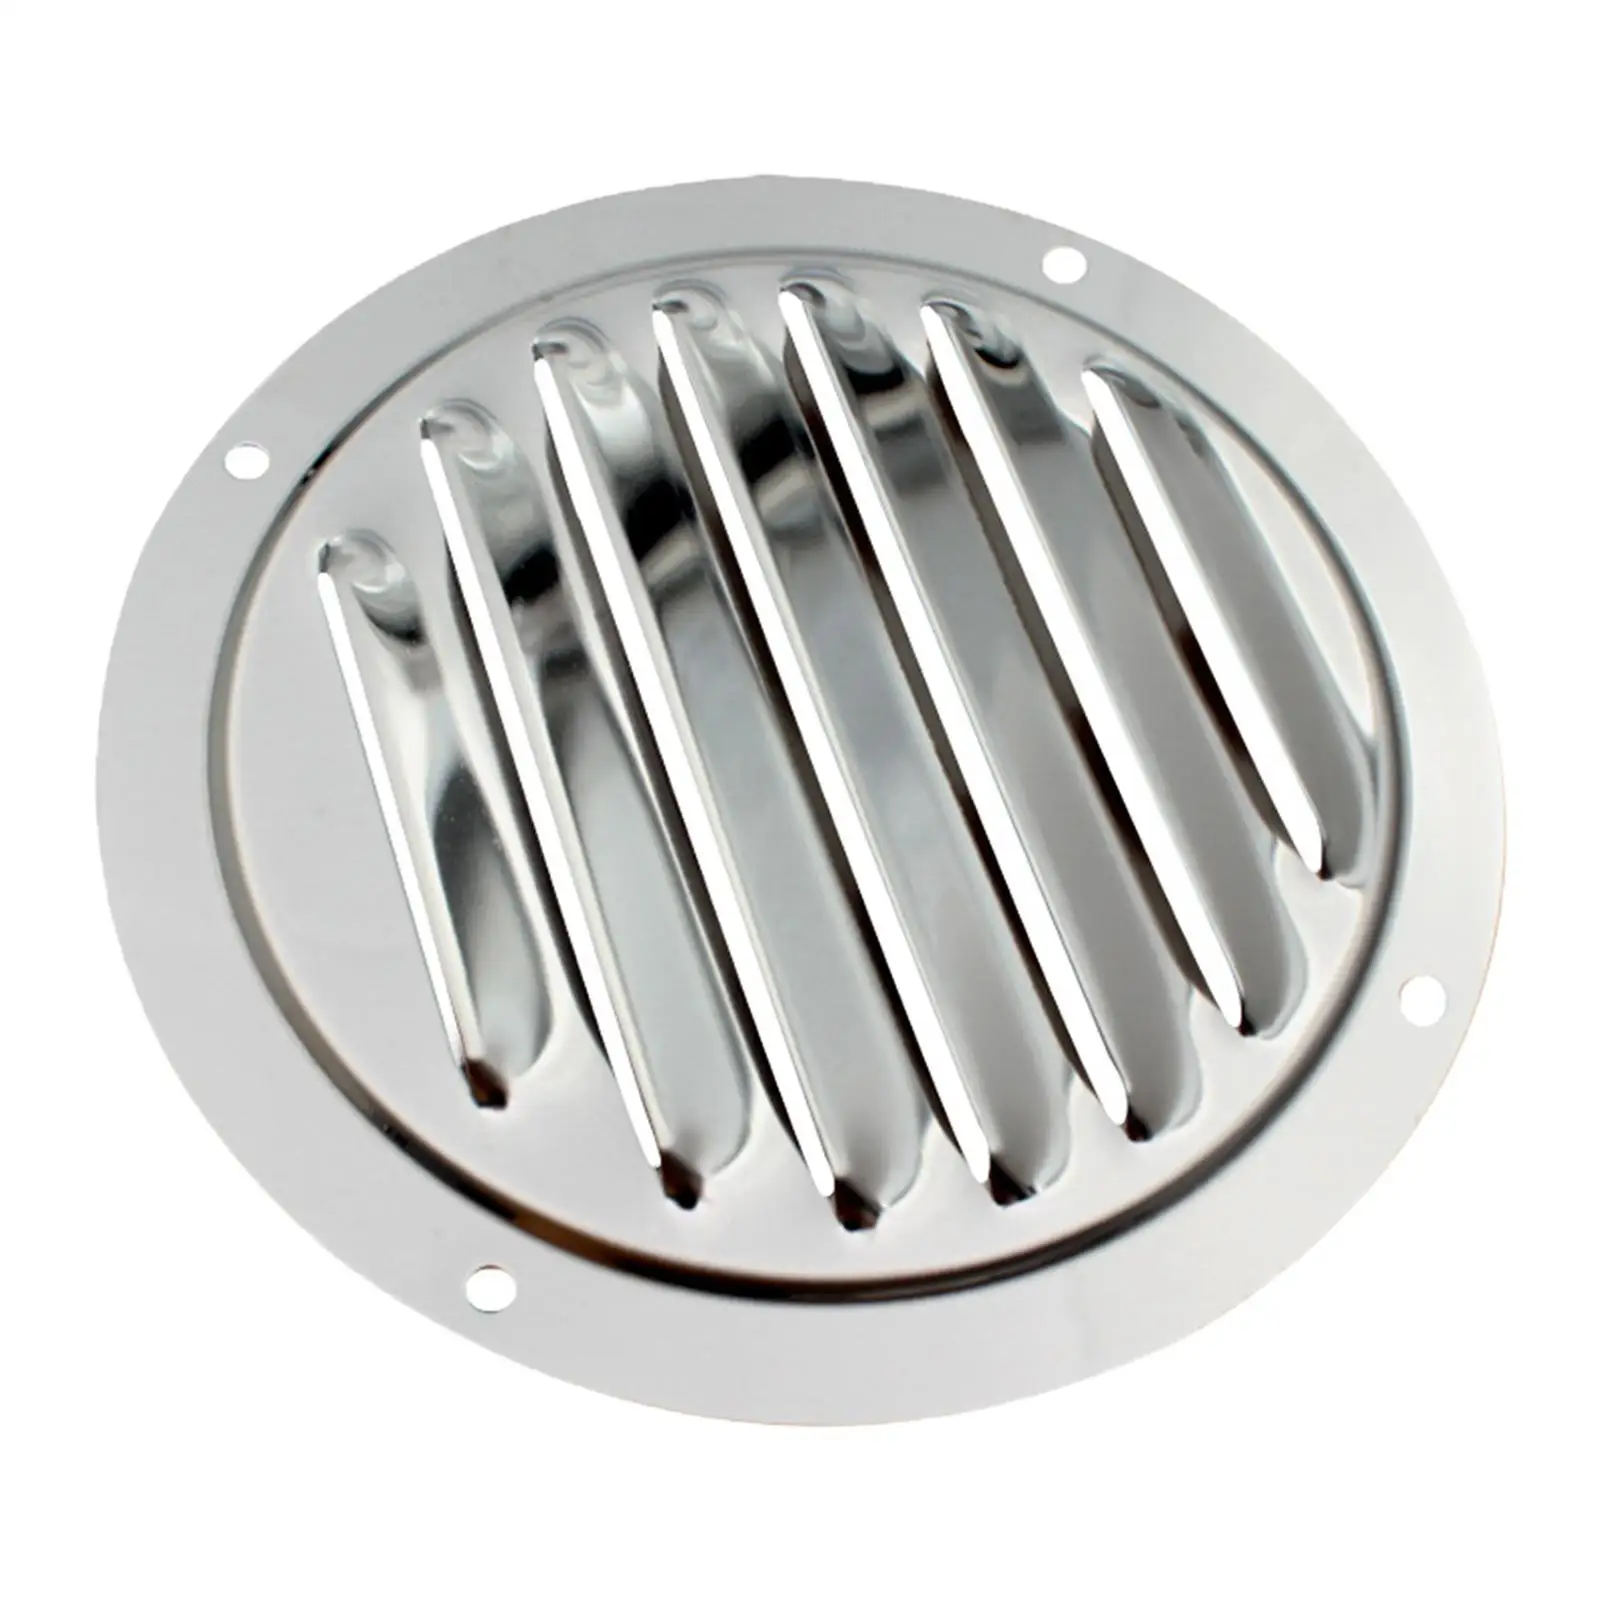 Air Vent Round Ventilation Grille Cover Boat Cabin Vents for Bus Outdoor Boat Car